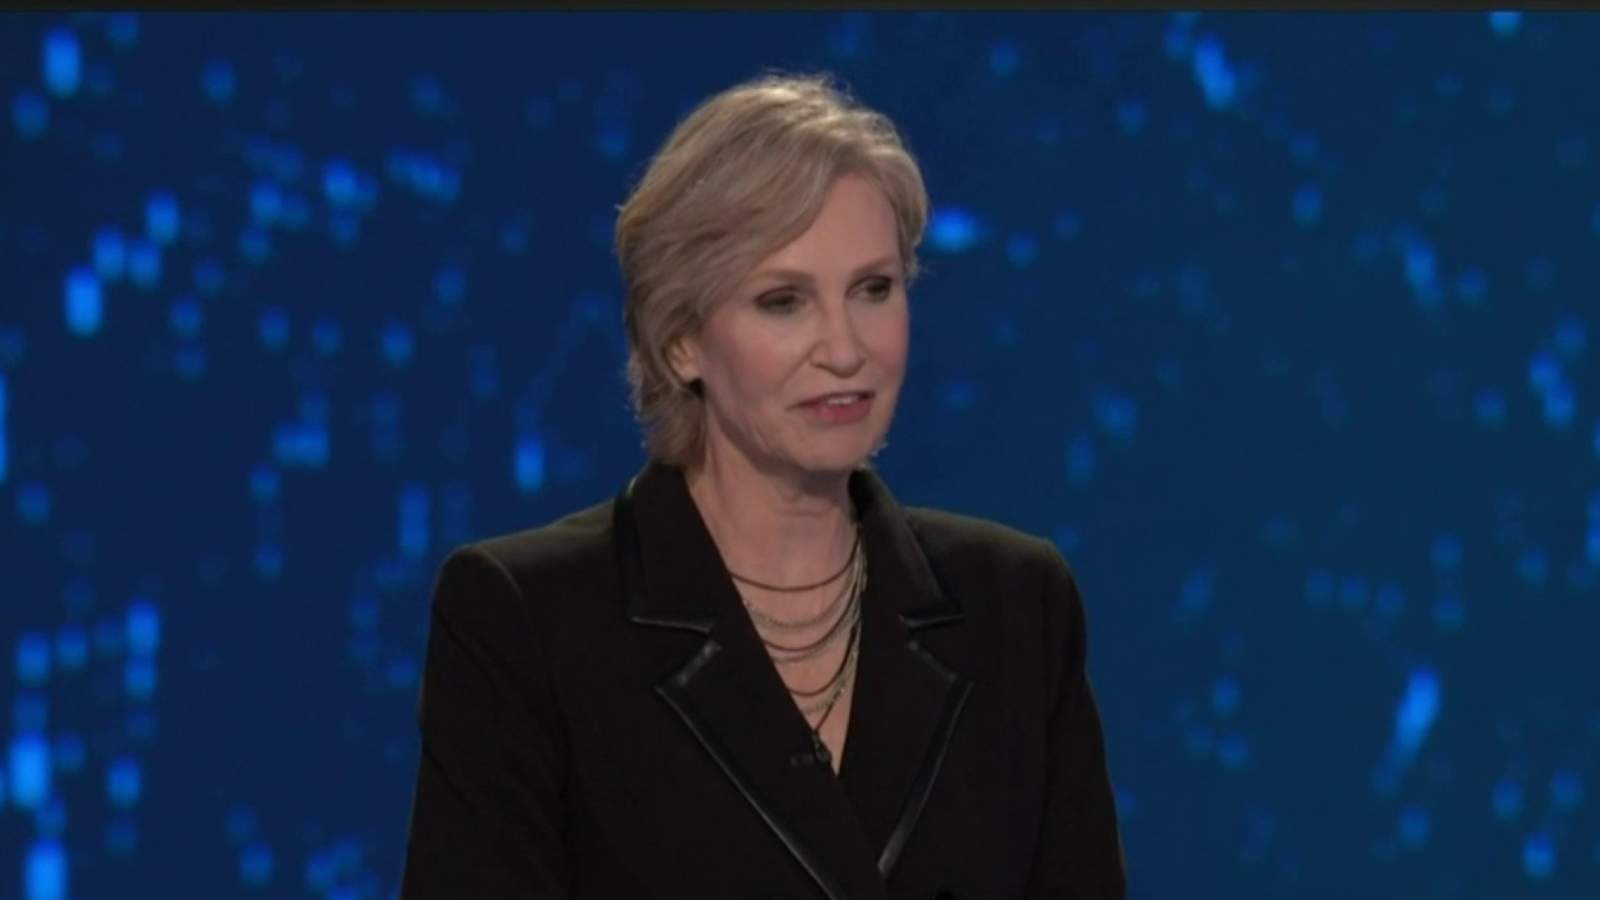 Jane Lynch takes over as new host of ‘The Weakest Link’